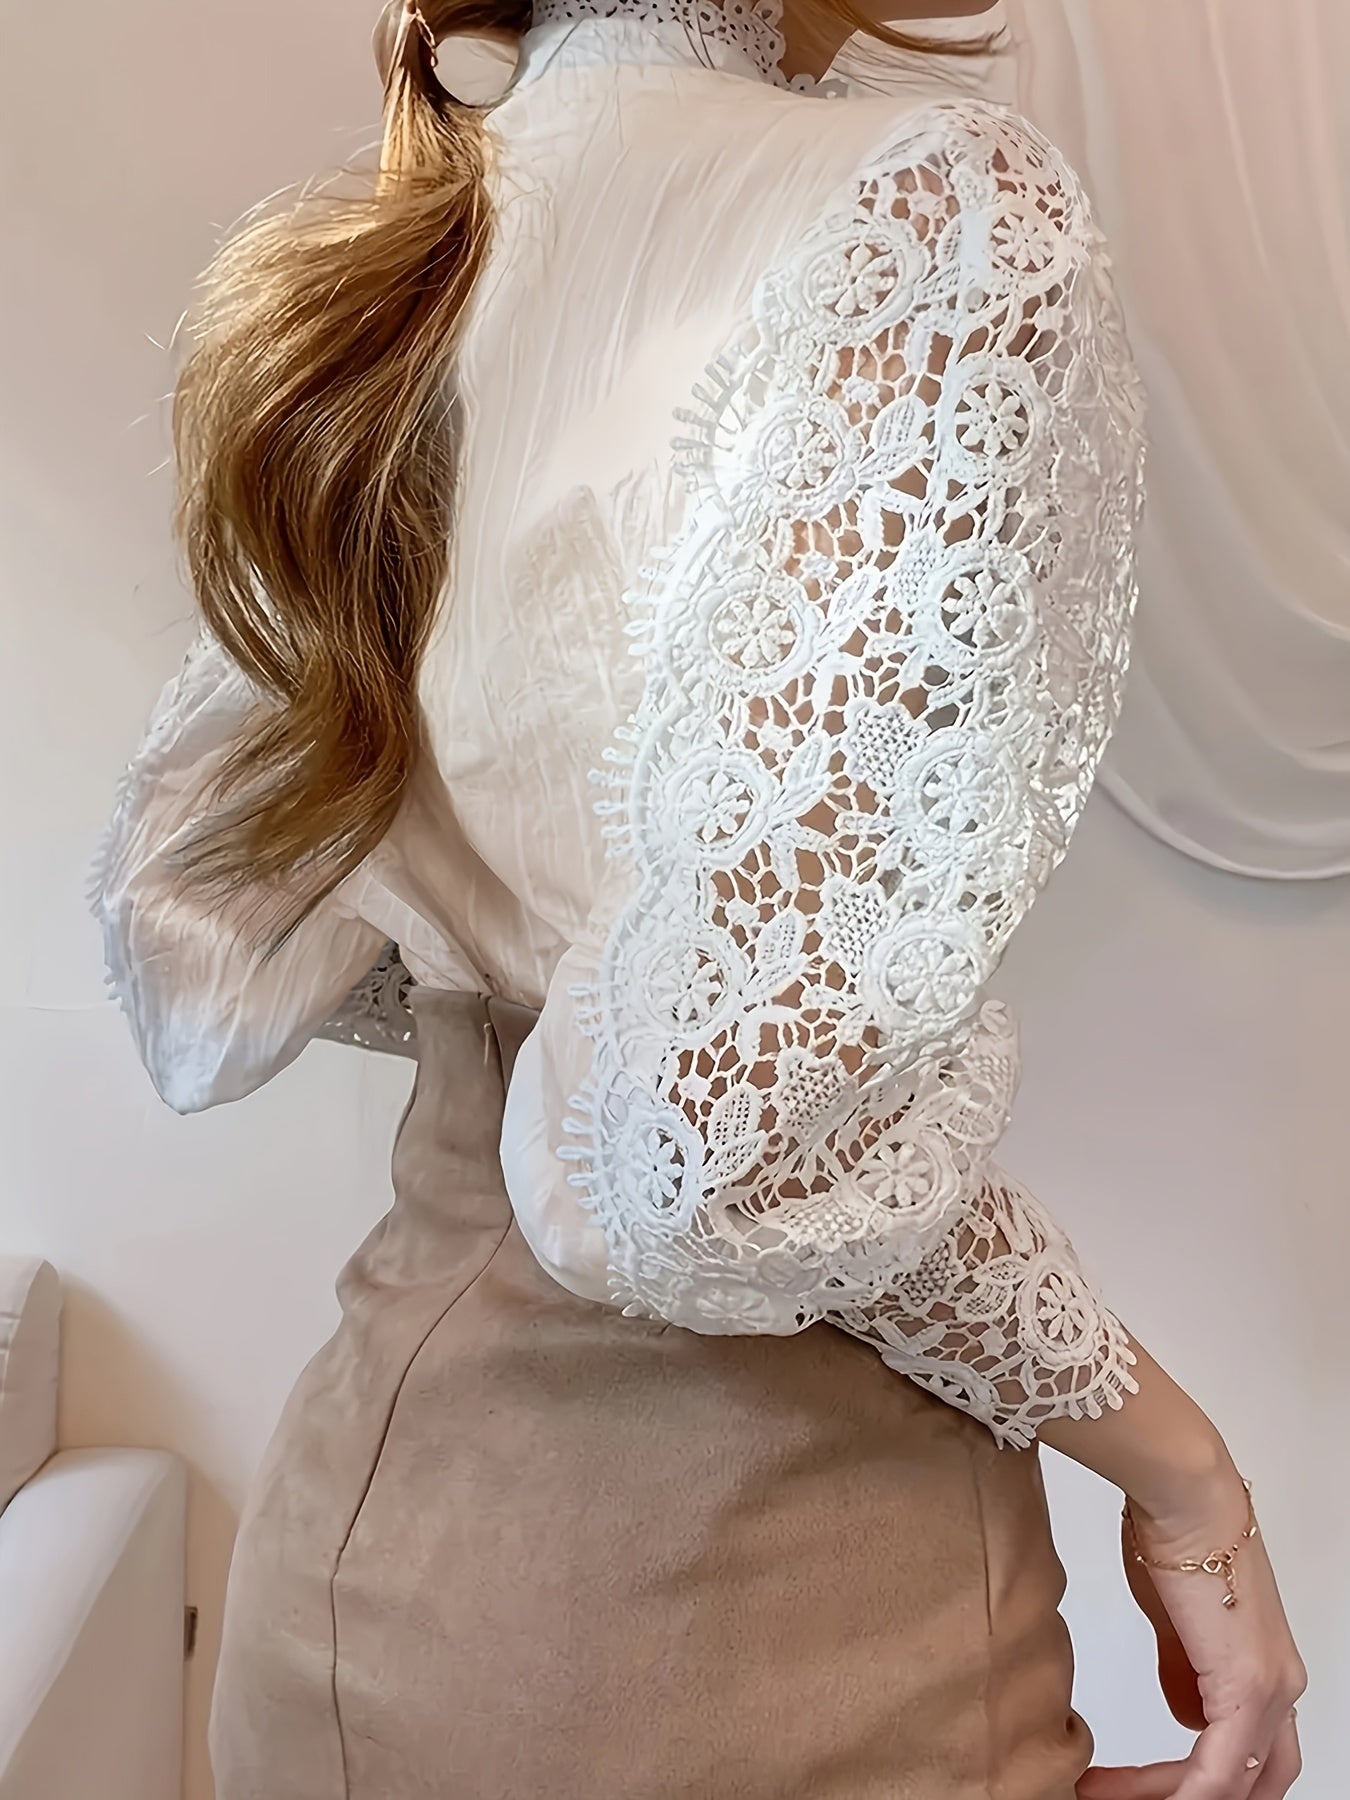 A person wearing a detailed white lace blouse with a mock neck collar and lantern sleeves, paired with a tan skirt. Their light brown wavy hair cascades over one shoulder, complementing the Maramalive™ Plus Size Elegant Blouse, Women's Plus Solid Contrast Lace Lantern Sleeve Button Up Mock Neck Shirt Top. The background appears to be a light-colored indoor setting.